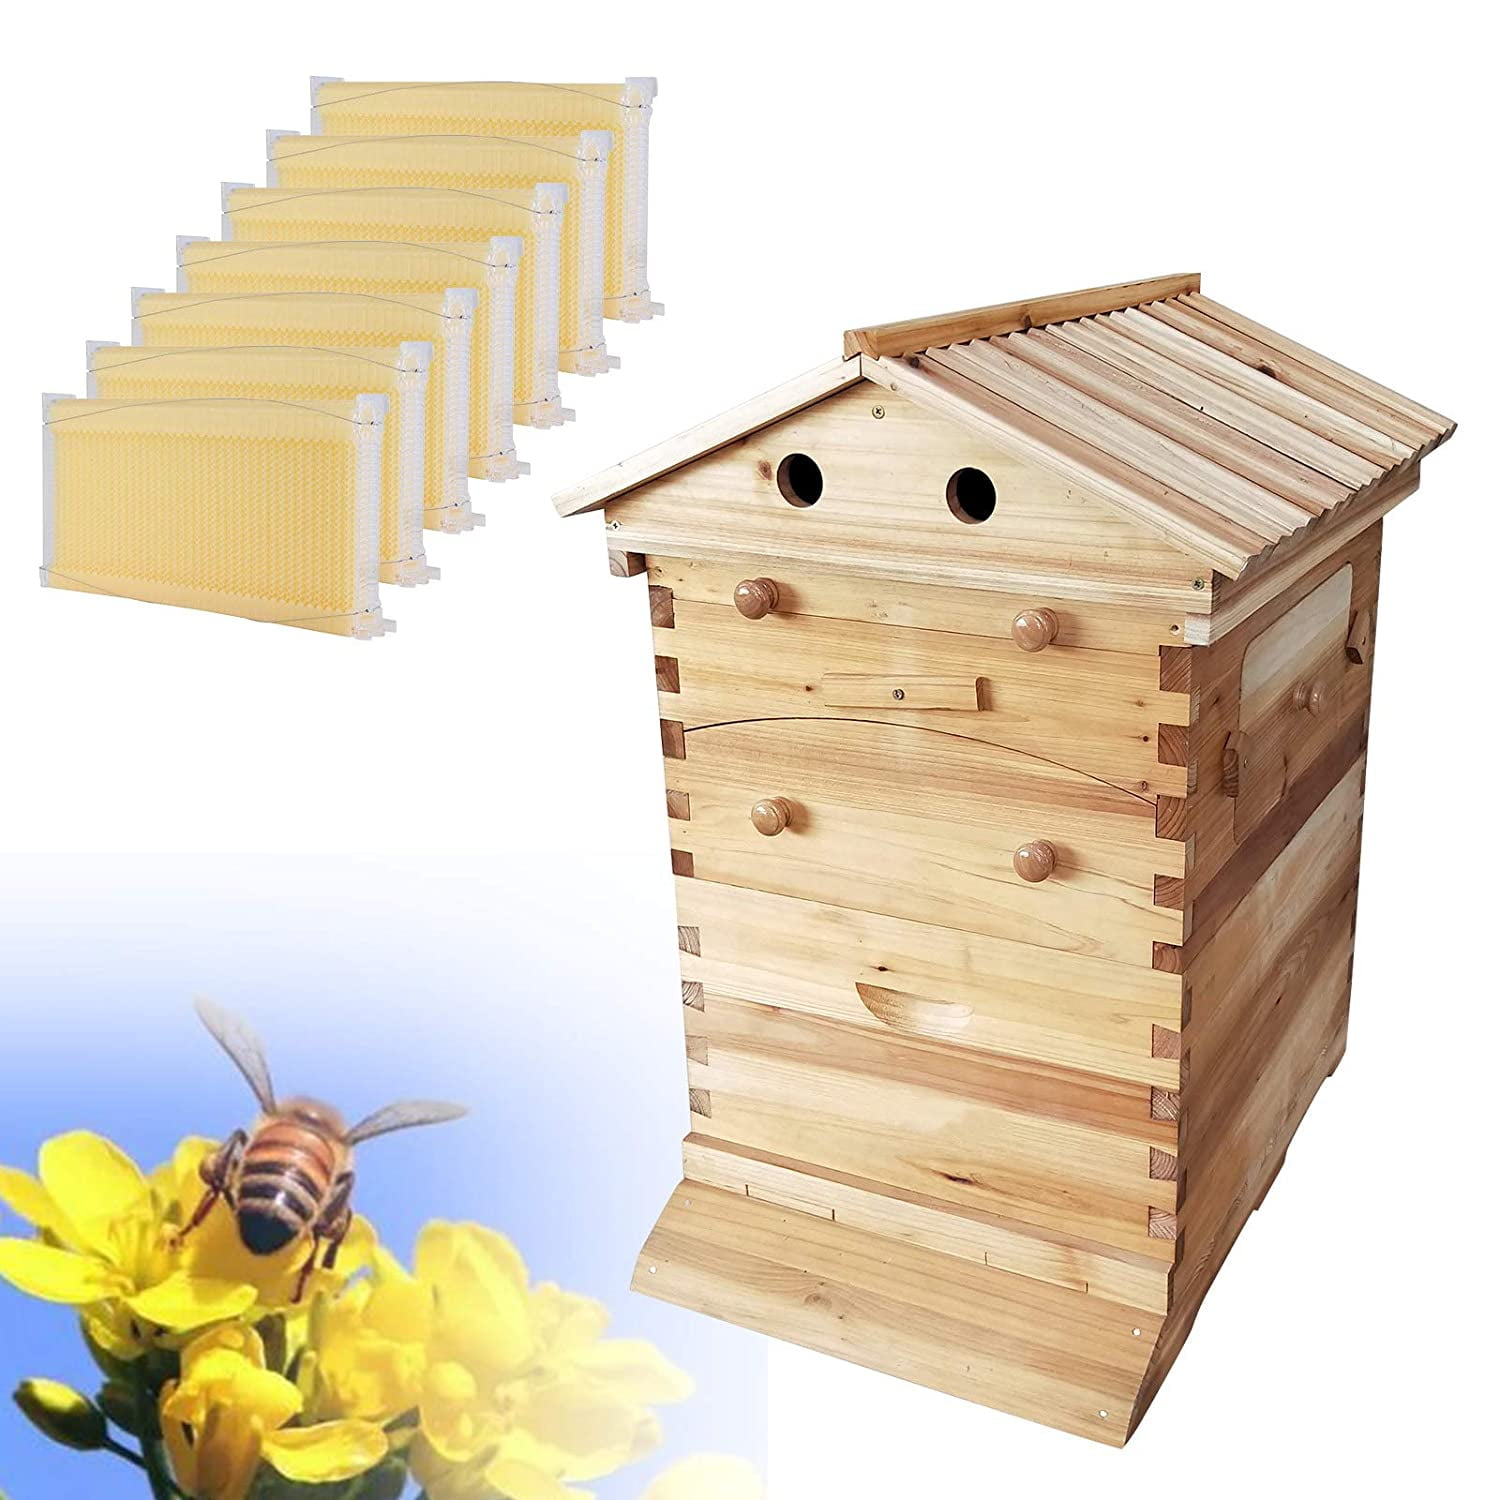 Details about   7 Pcs Automatic Honey Beehive Frames Beekeeping Wooden House Up Box Set NEW 